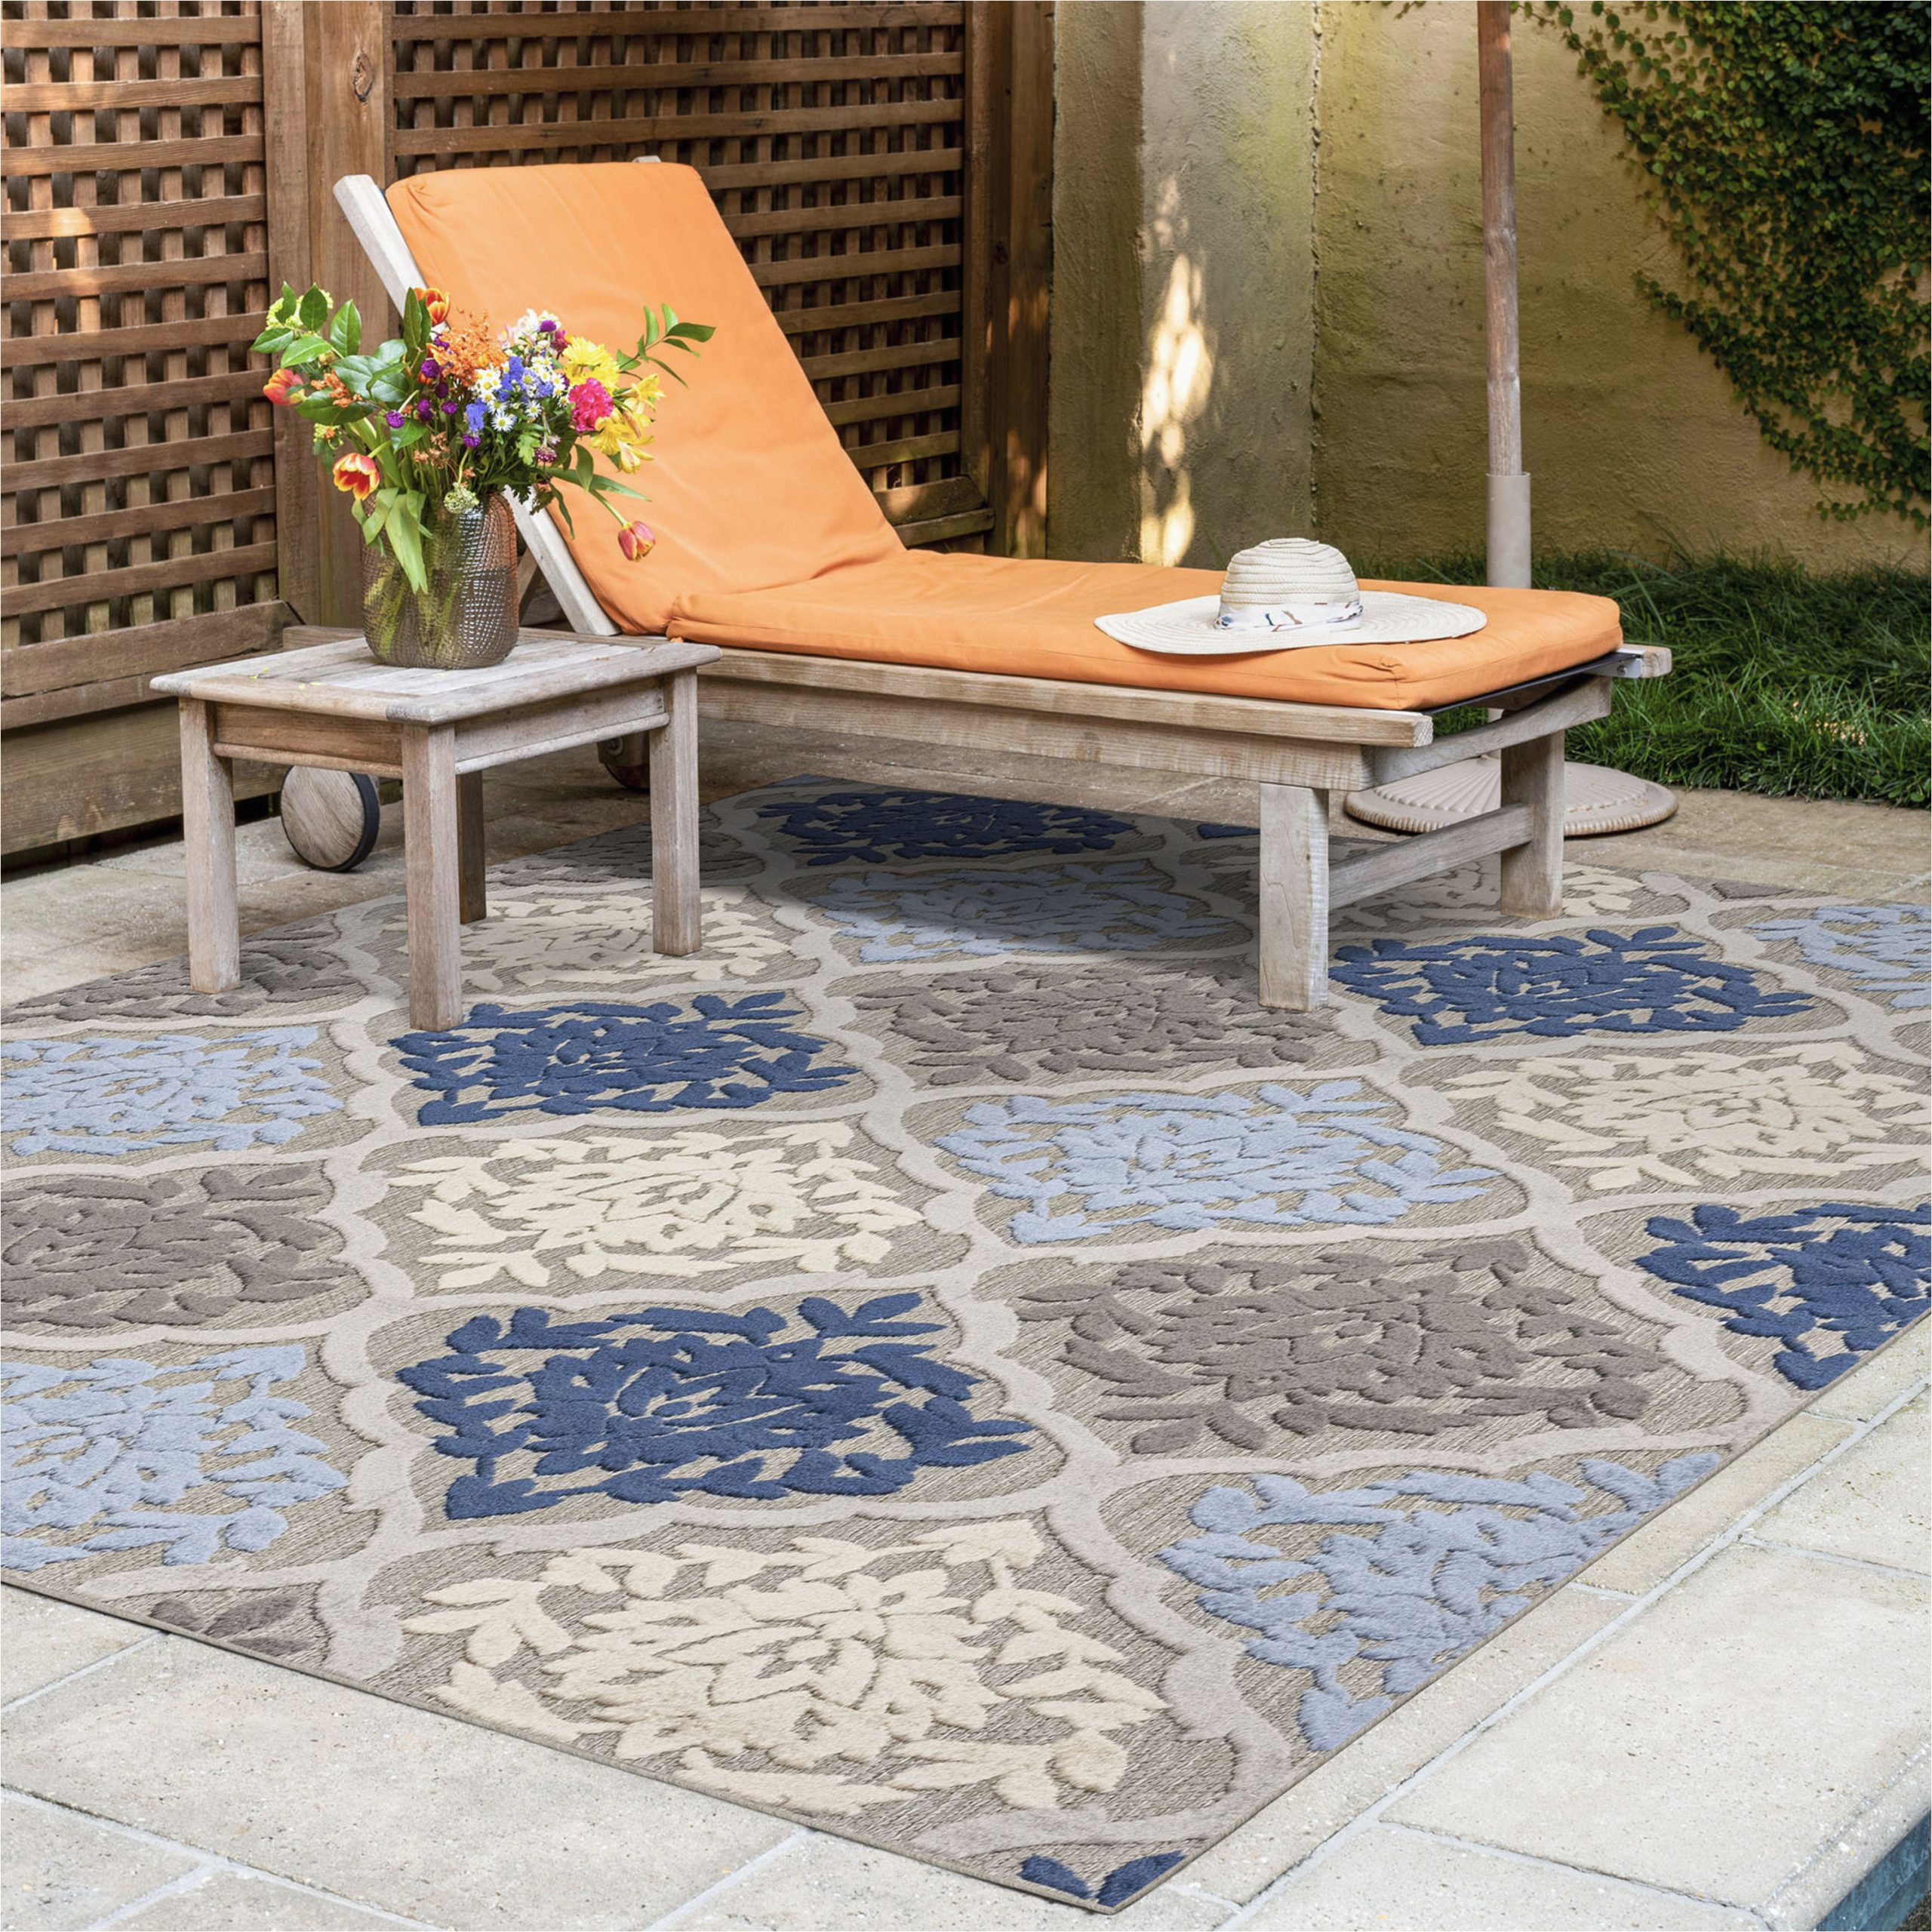 Elements Indoor Outdoor Citra Medallion area Rug Modern 8×10 area Rug (7’11” X 10’3”) Medallion Blue, Gray Indoor Outdoor Rectangle Easy to Clean